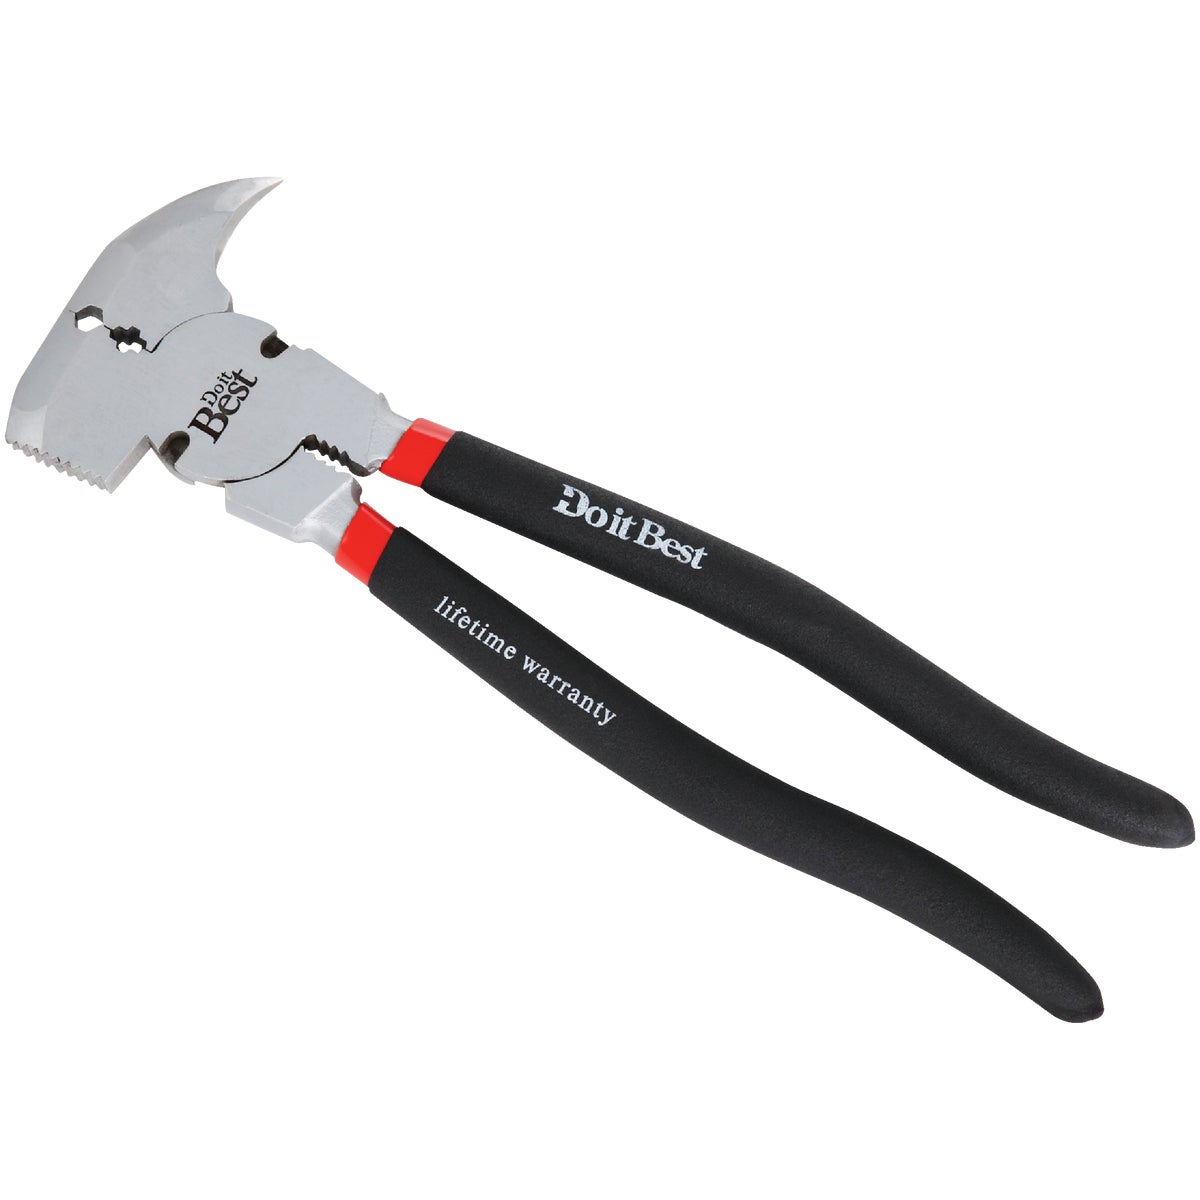 Item 326007, All-purpose tool constructed of drop-forged steel.